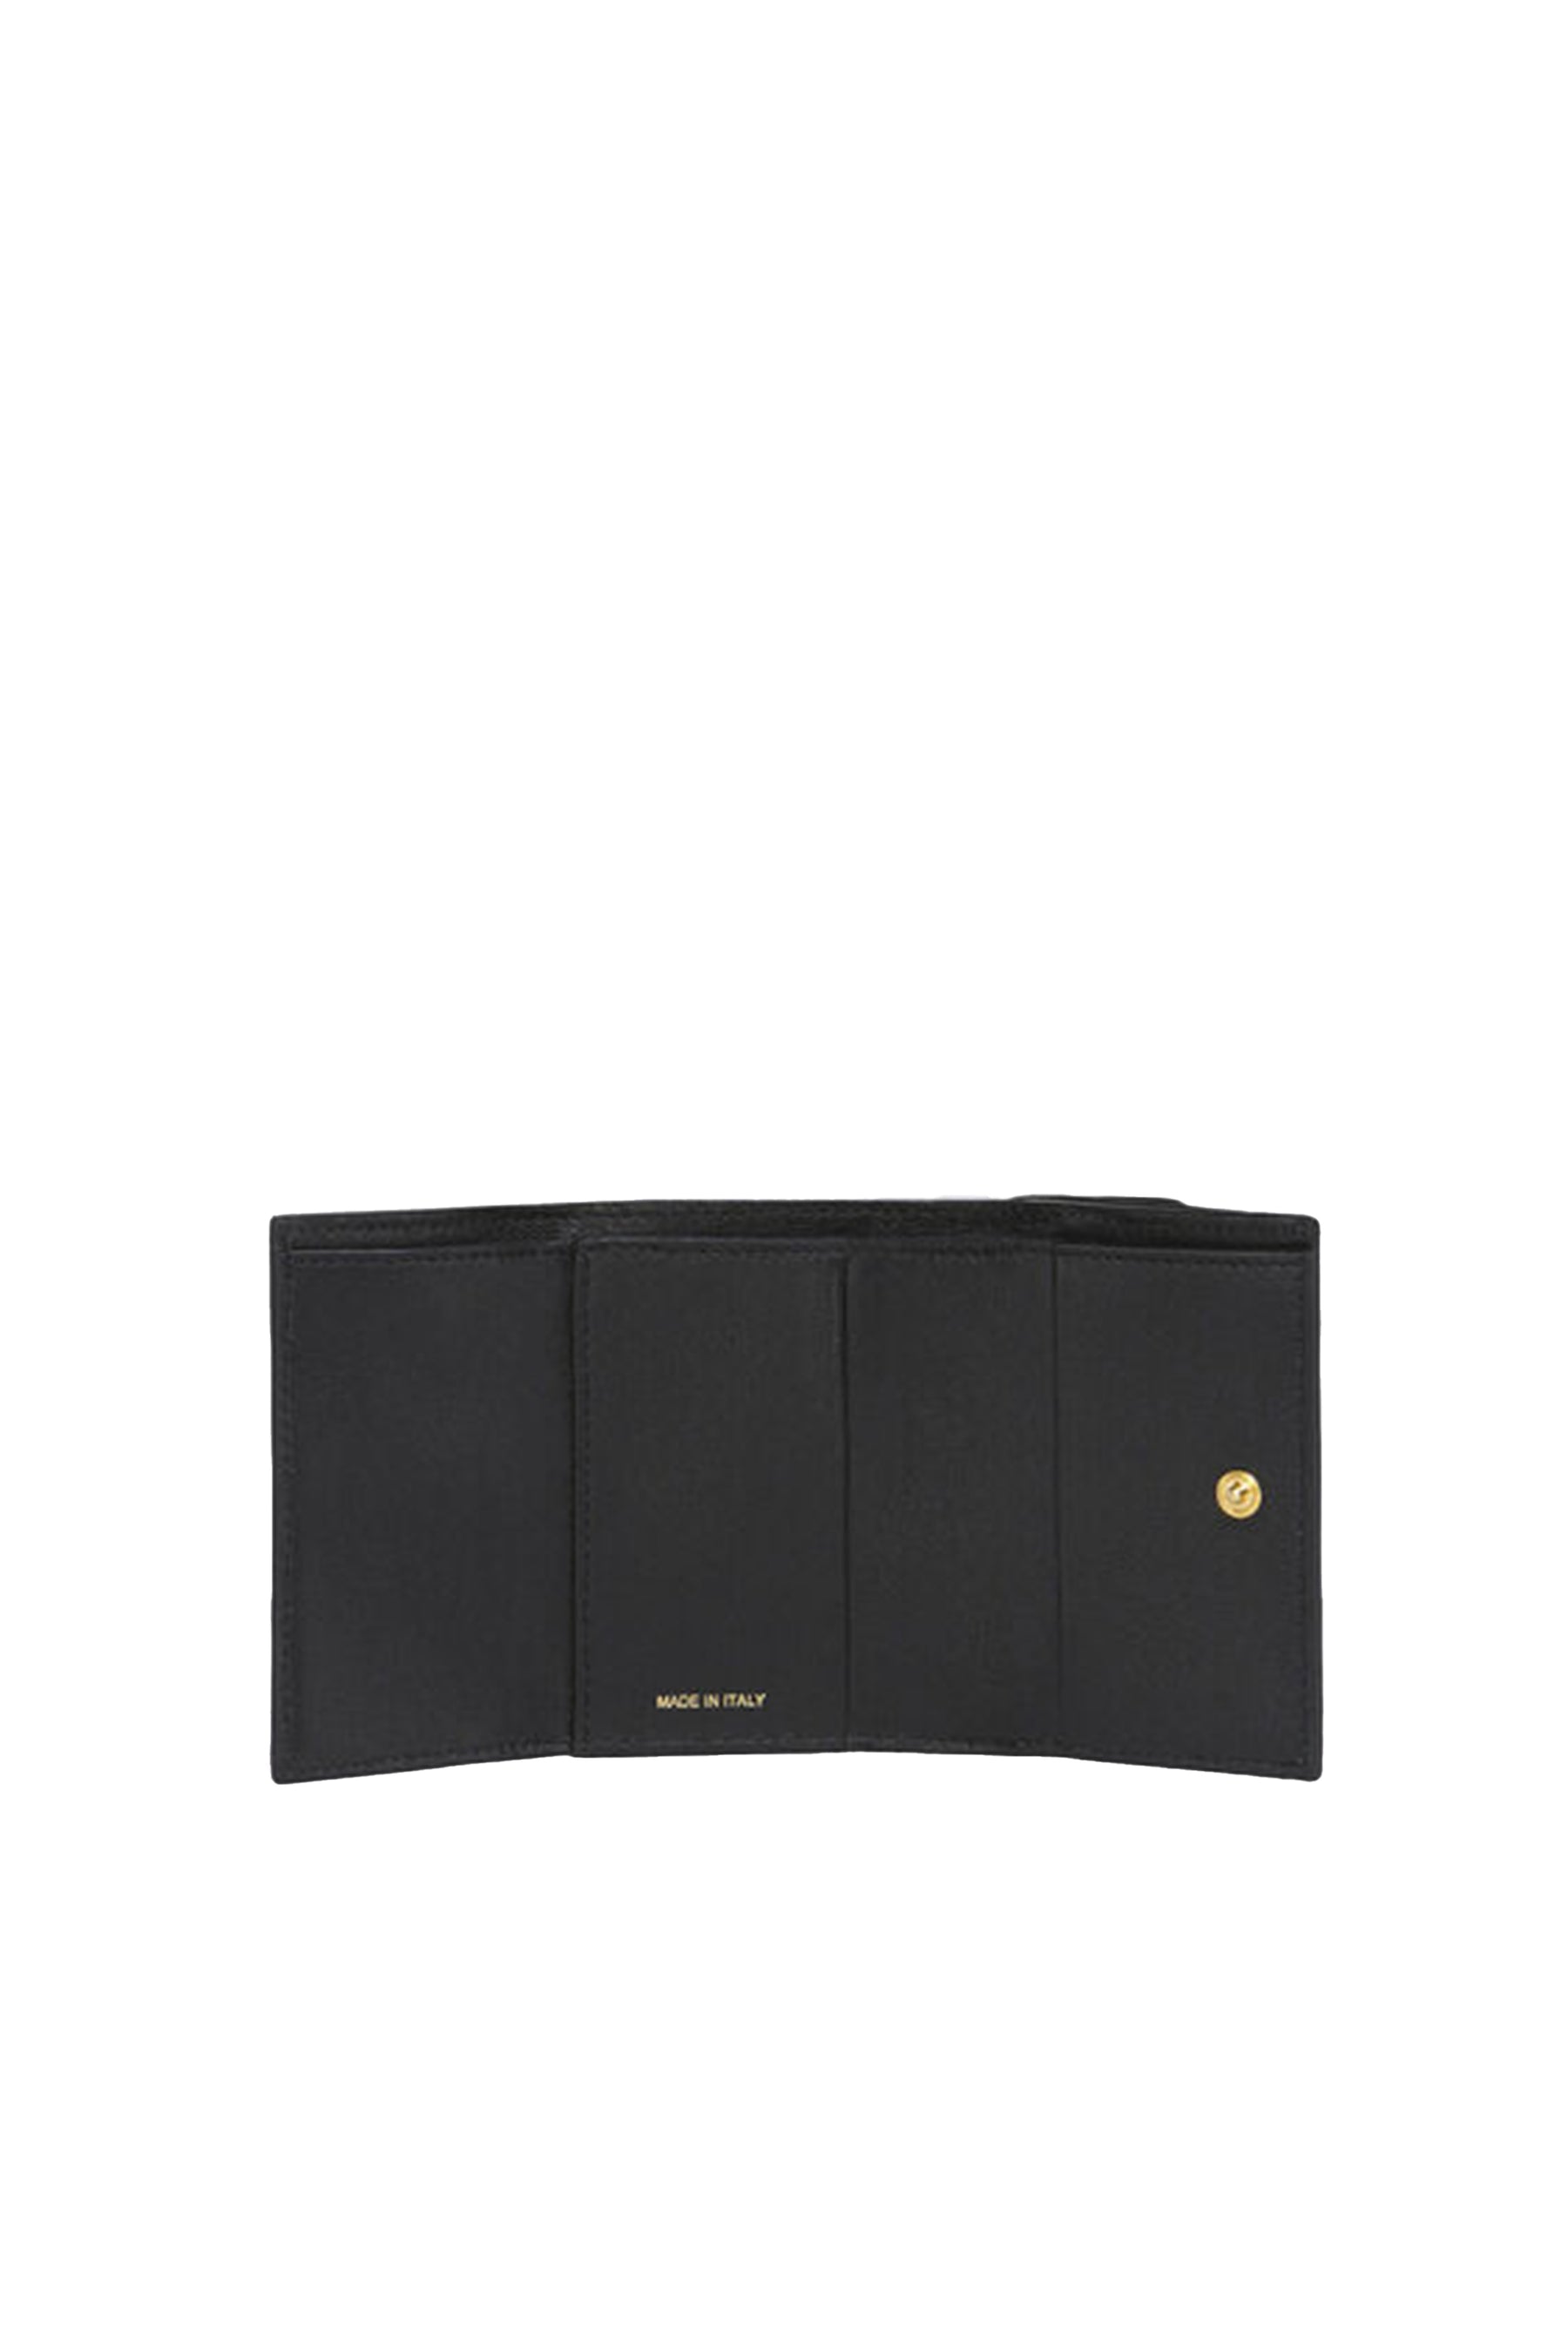 TRIFOLD / BLK